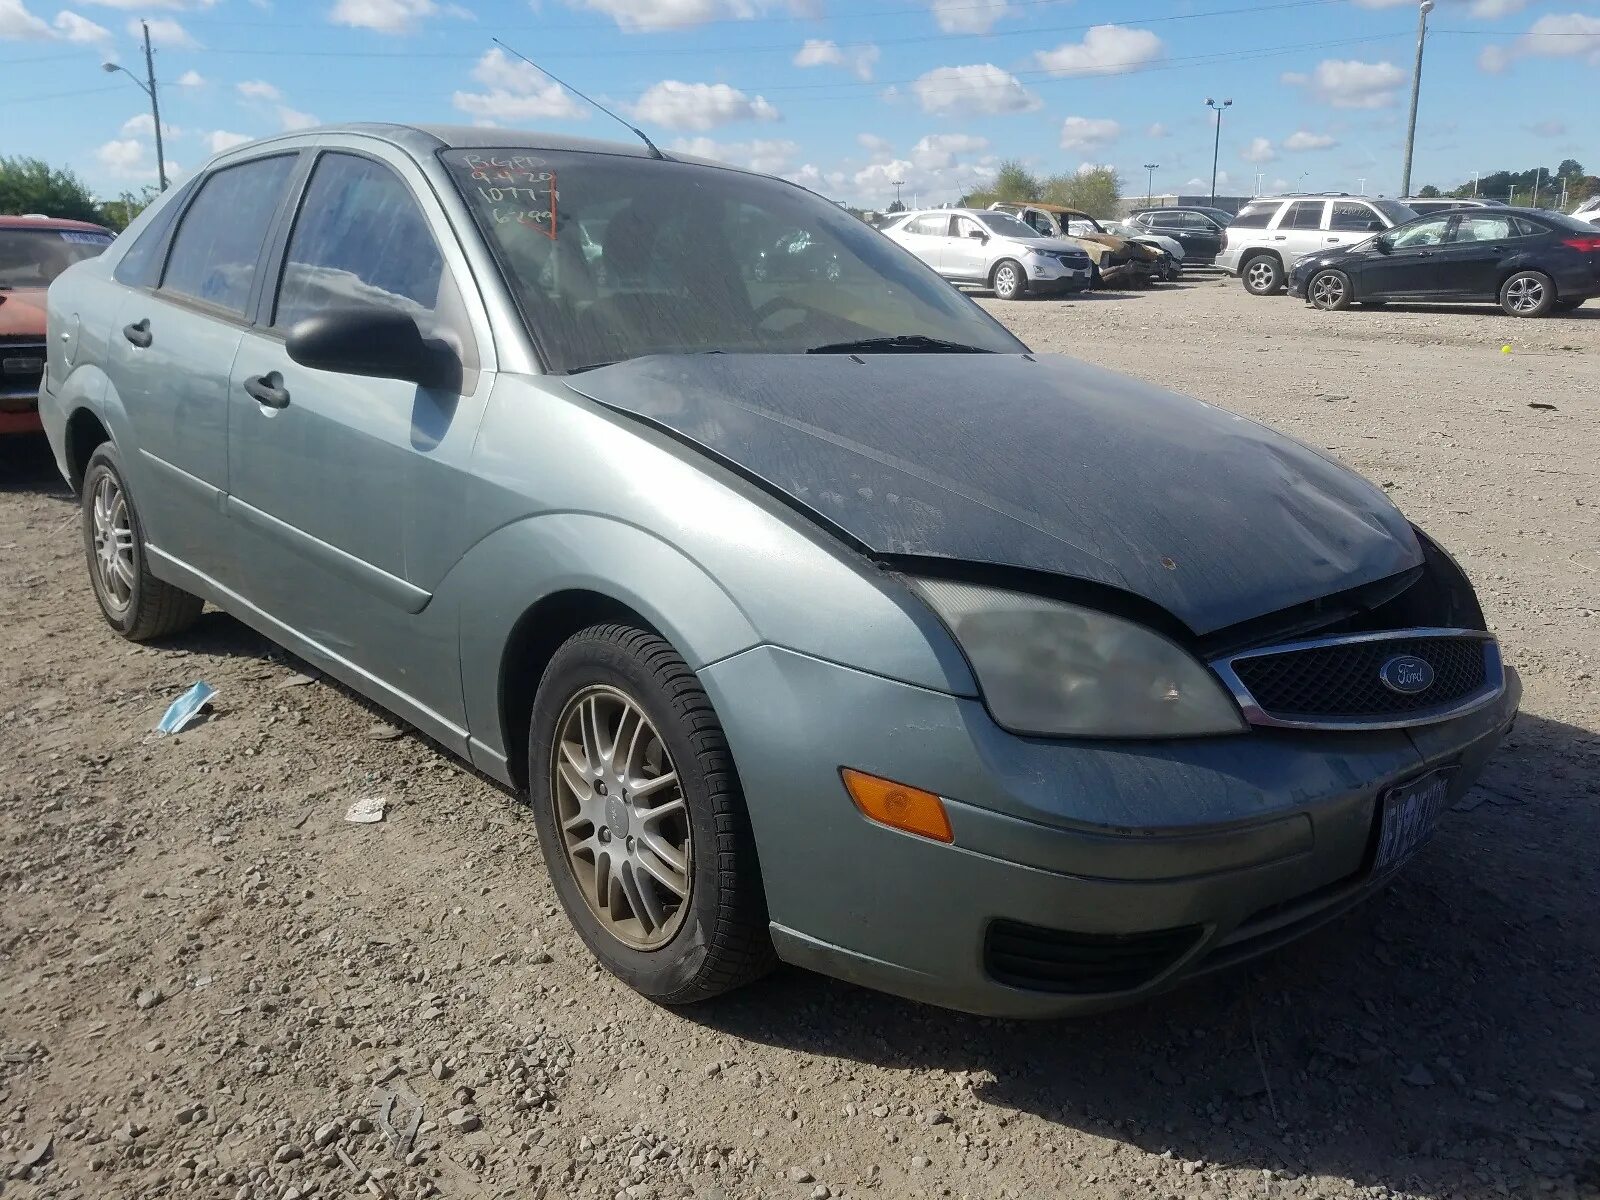 Форд 2005 г. Ford Focus zx4. Ford Focus zx4 2005. Форд фокус zx4 2005г американец. Форд фокус zx4 2004 американец.